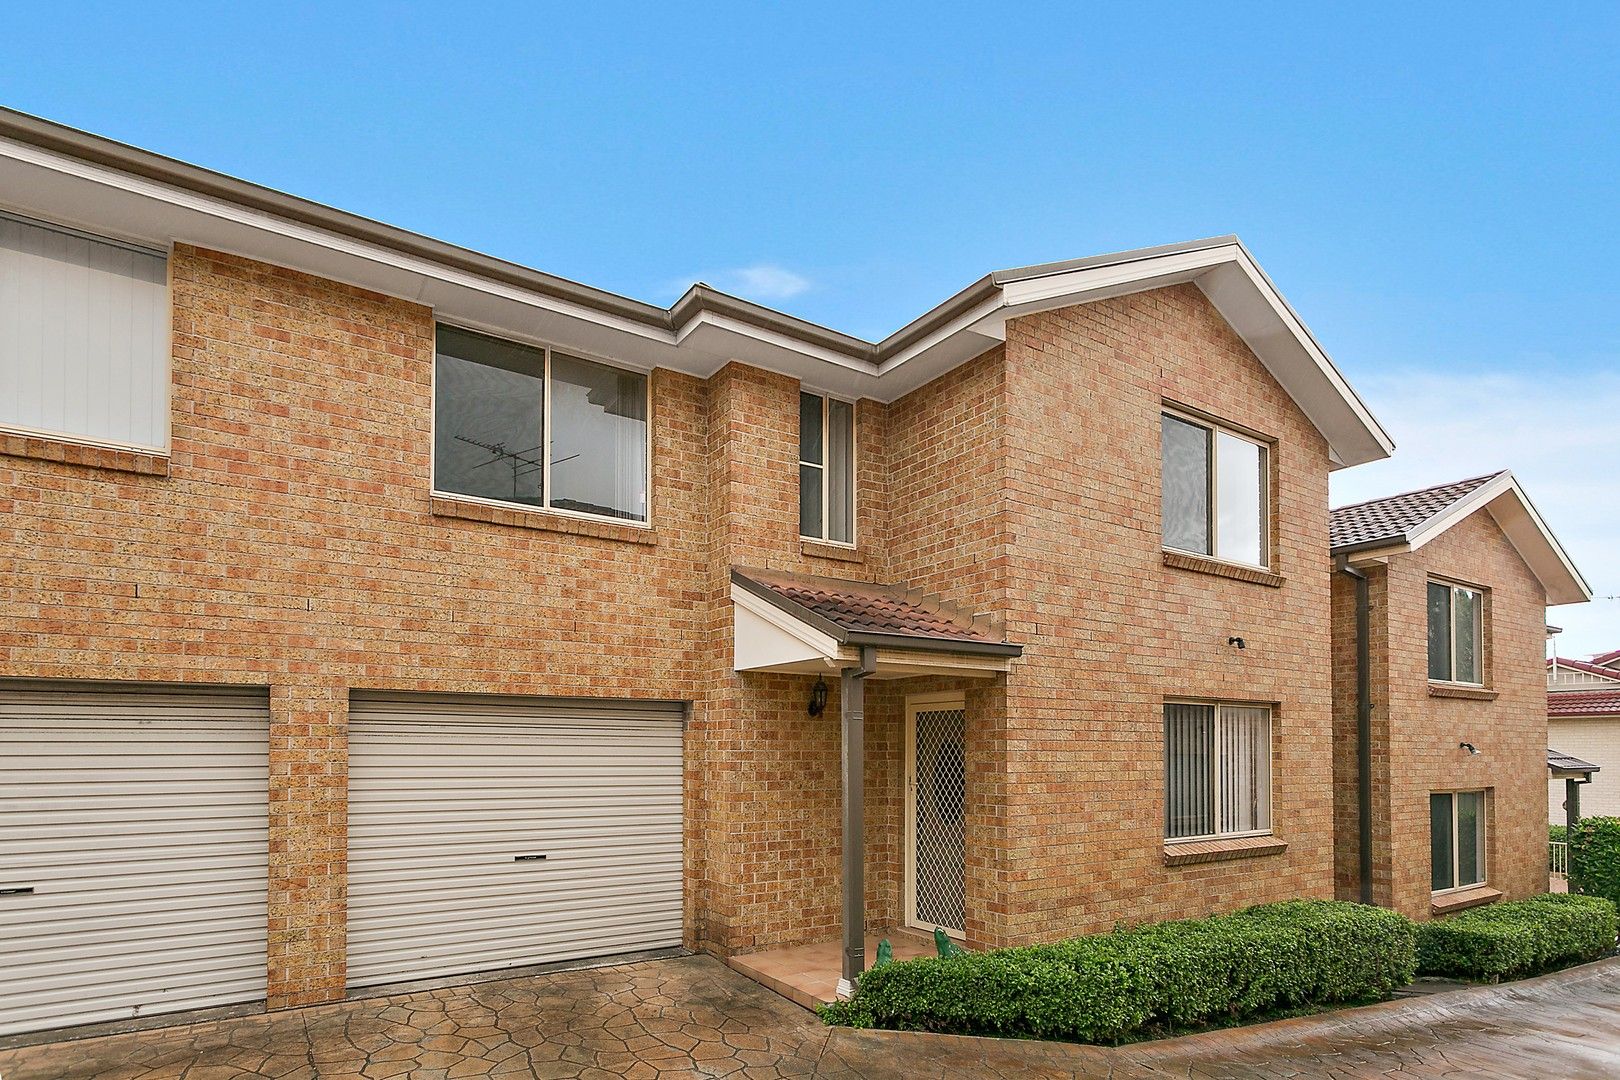 3 bedrooms Townhouse in 3/27-29 New Dapto Road WOLLONGONG NSW, 2500